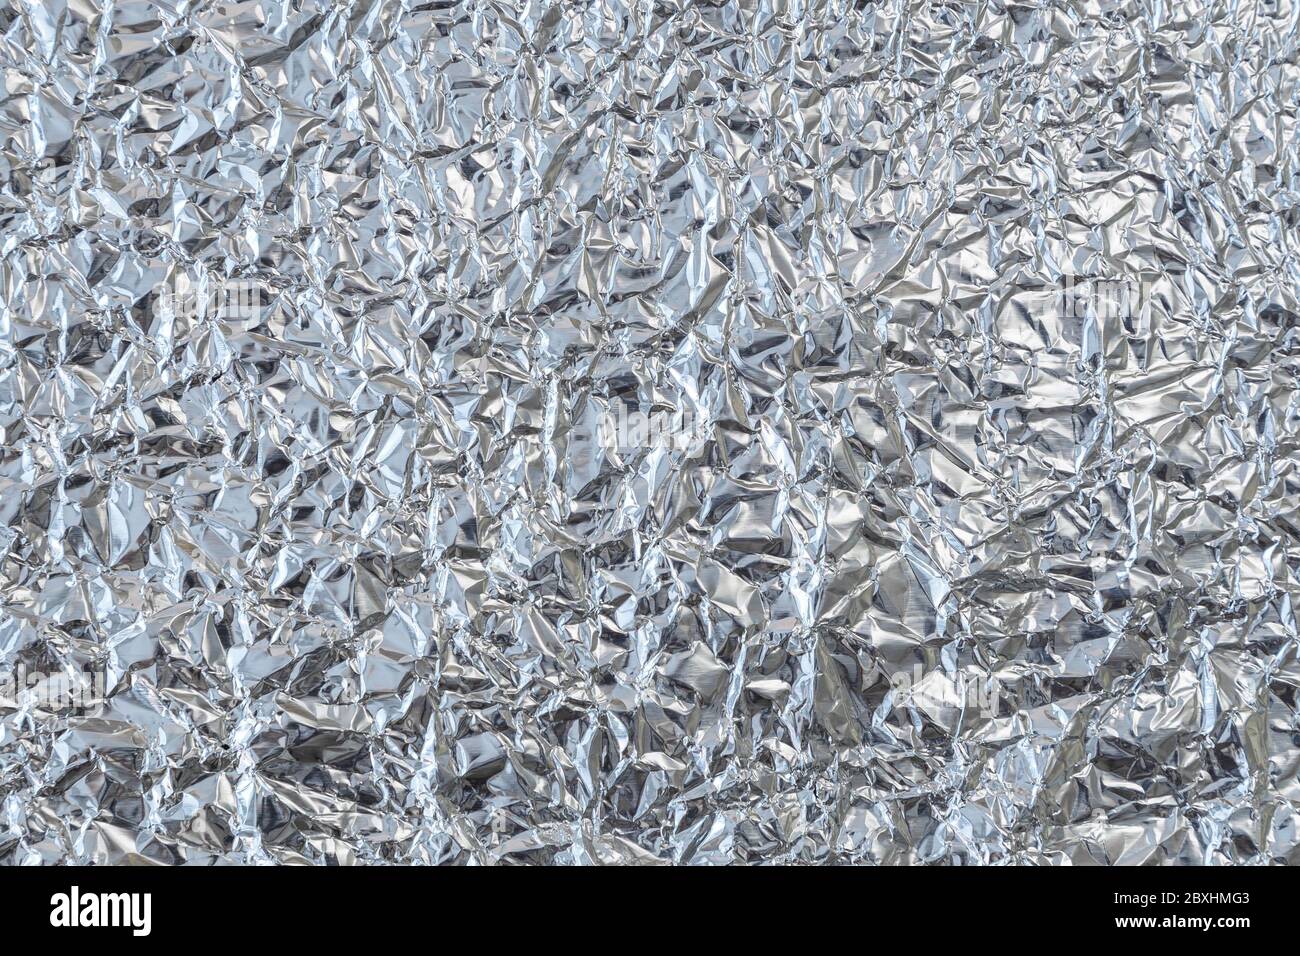 Close-up of crumpled tin foil surface, top view. Abstract full frame textured silvery background. Stock Photo